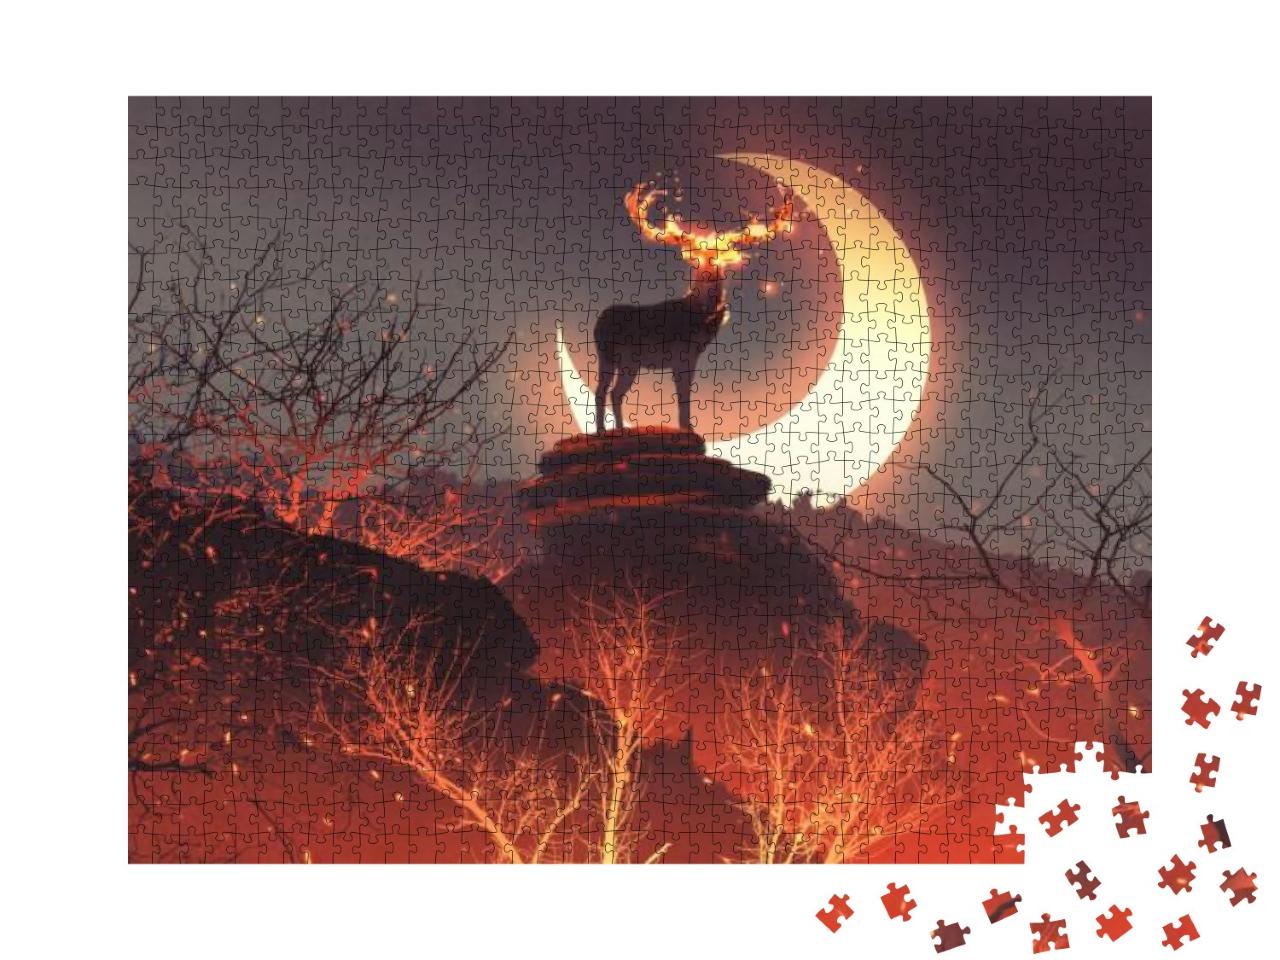 The Deer with Its Fire Horns Standing on Rocks in Forest... Jigsaw Puzzle with 1000 pieces